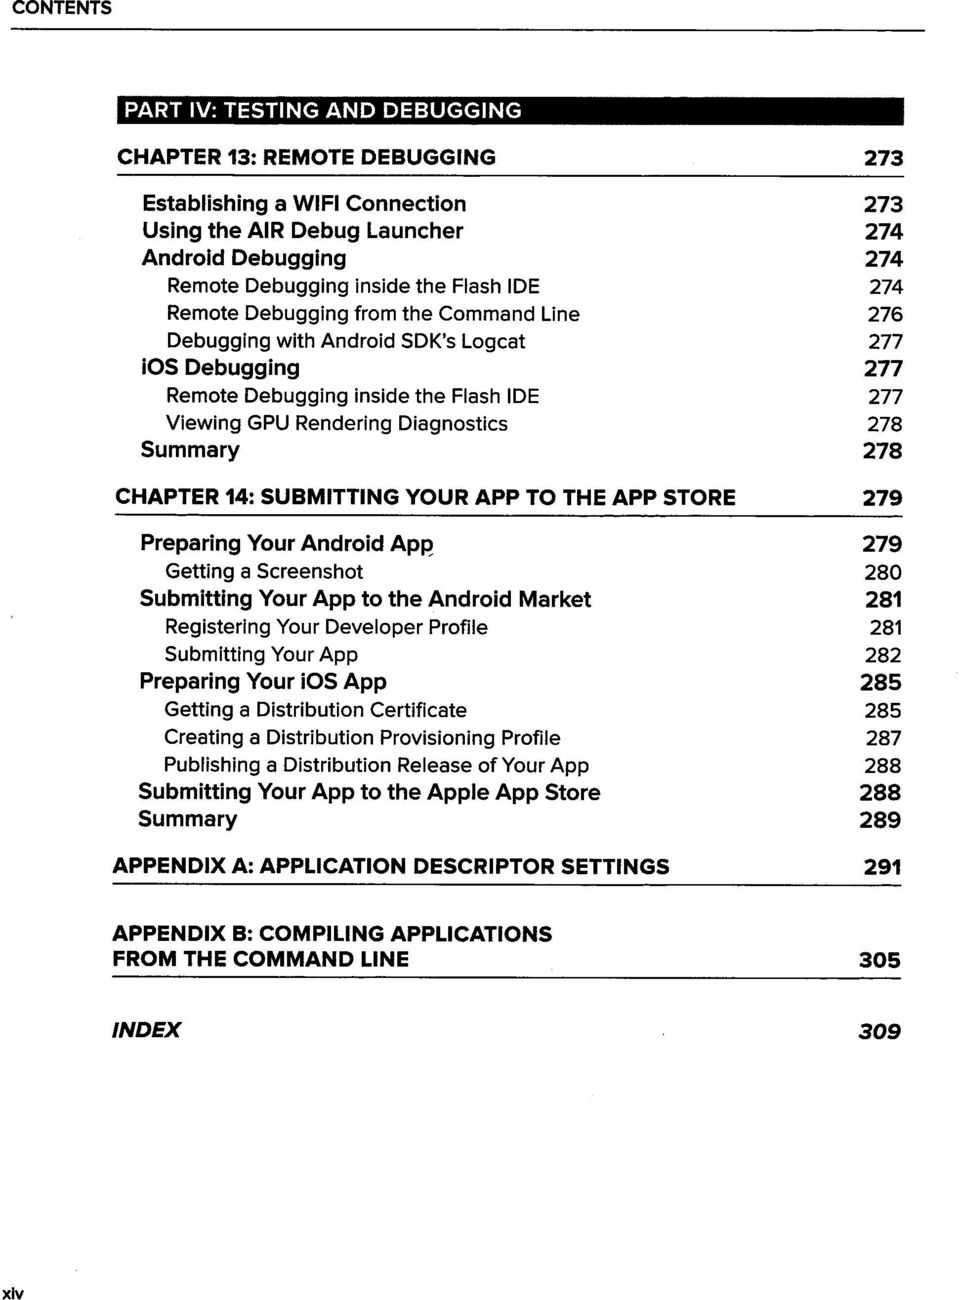 CHAPTER 14: SUBMITTING YOUR APP TO THE APP STORE 279 Preparing Your Android App 279 Getting a Screenshot 280 Submitting Your App to the Android Market 281 Registering Your Developer Profile 281